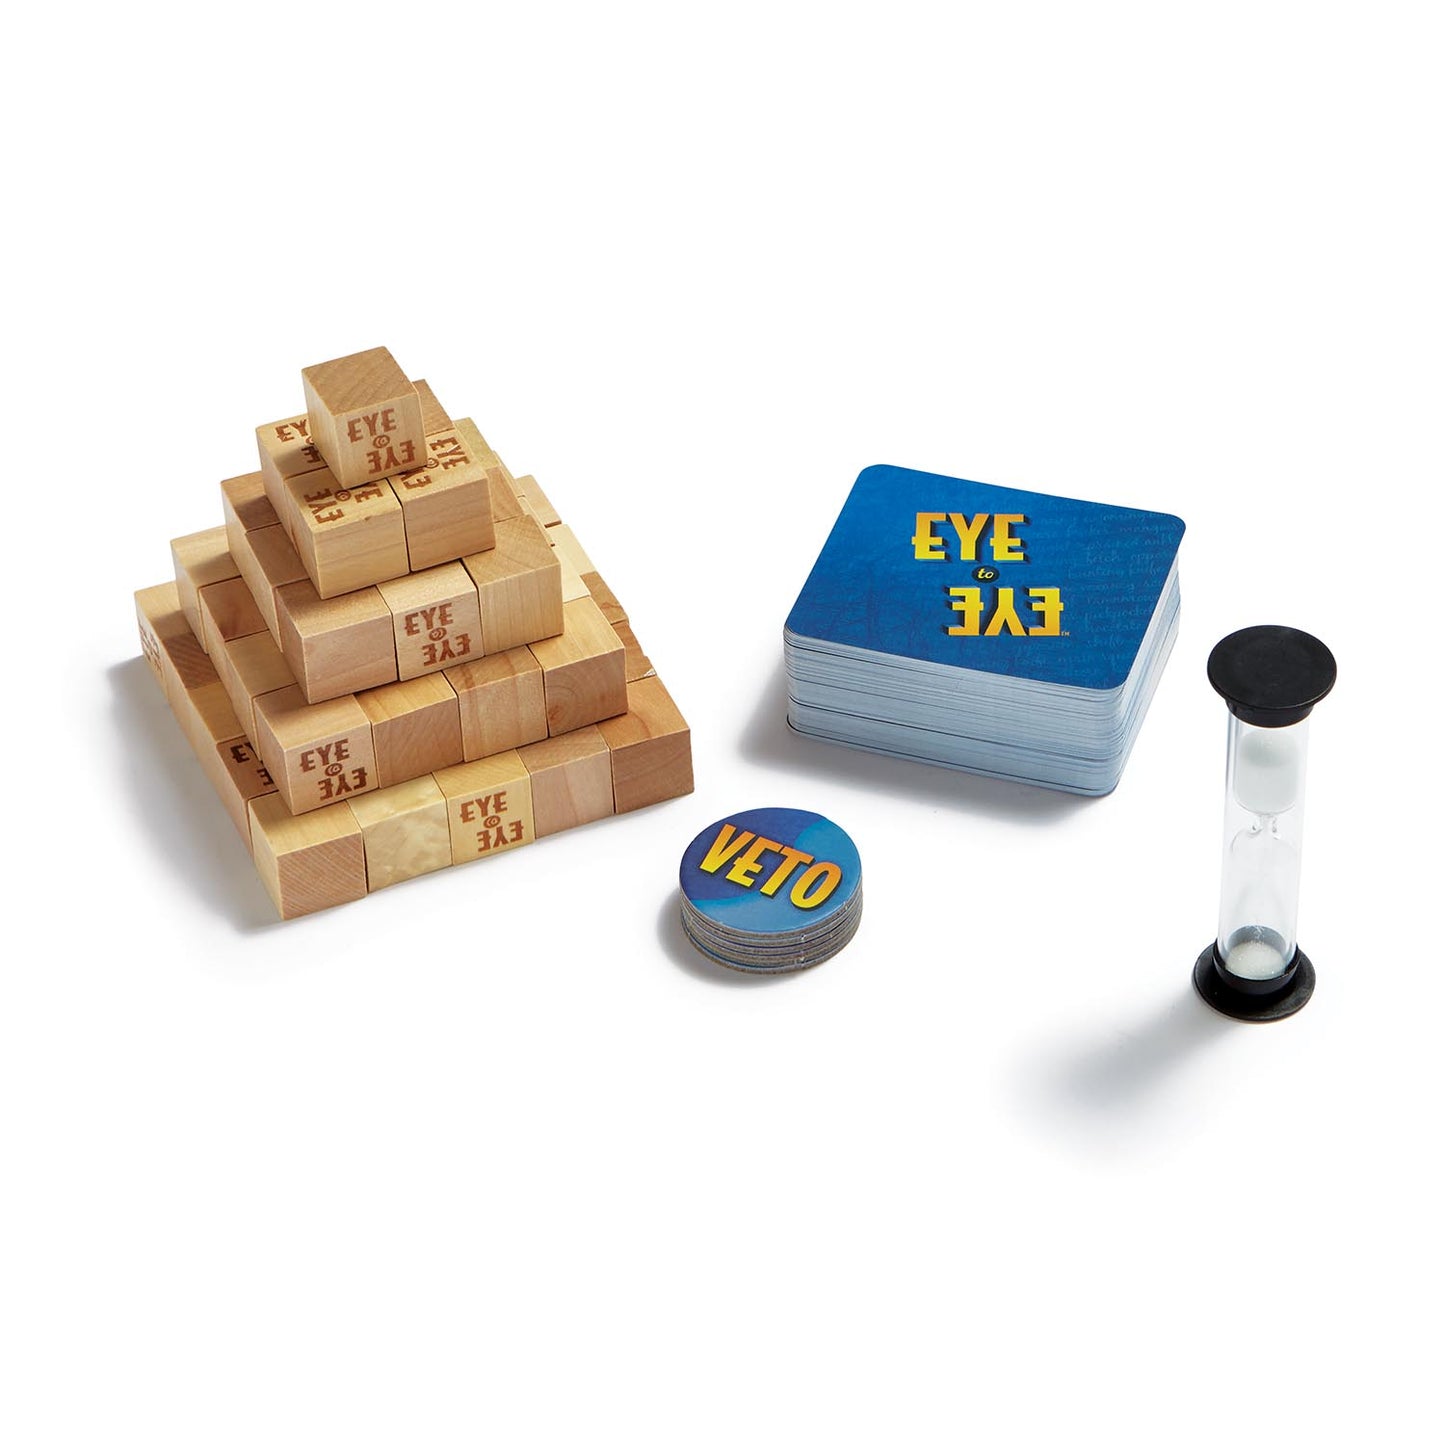 Eye to Eye by SimplyFun is a fun social game great for family game night for ages 10 and up.